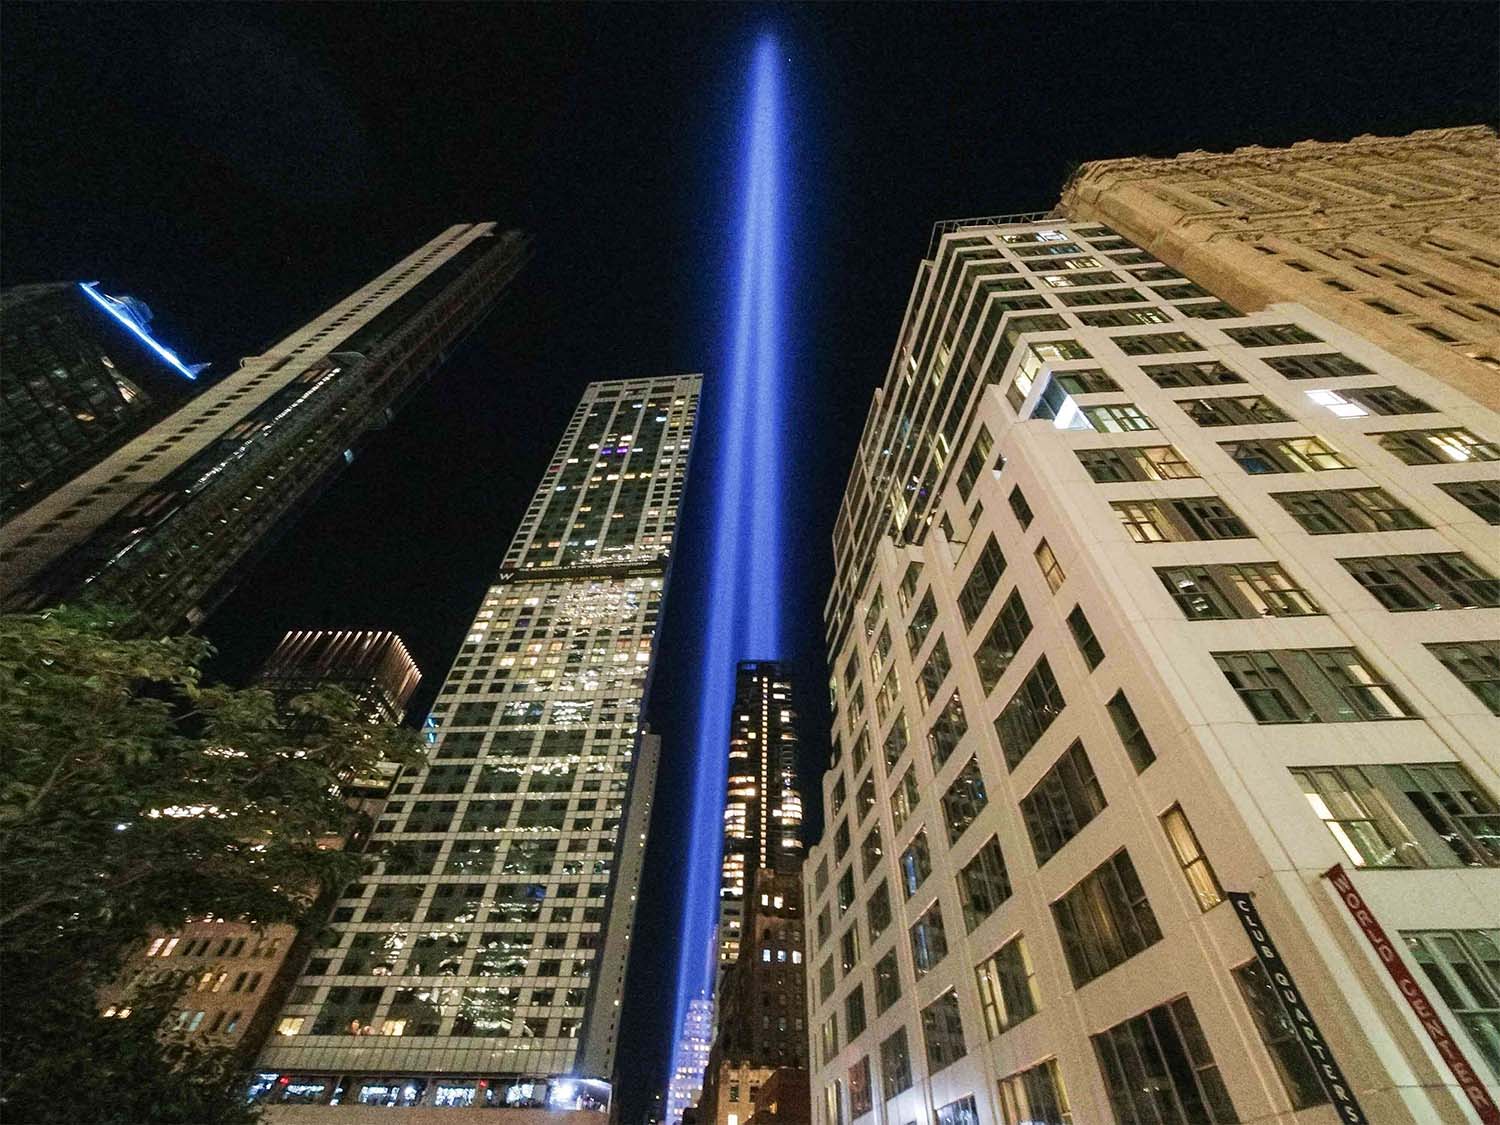 The annual Tribute in Light projects two pillars of light into the night sky next to the buildings overlooking the 9/11 Memorial & Museum in New York City